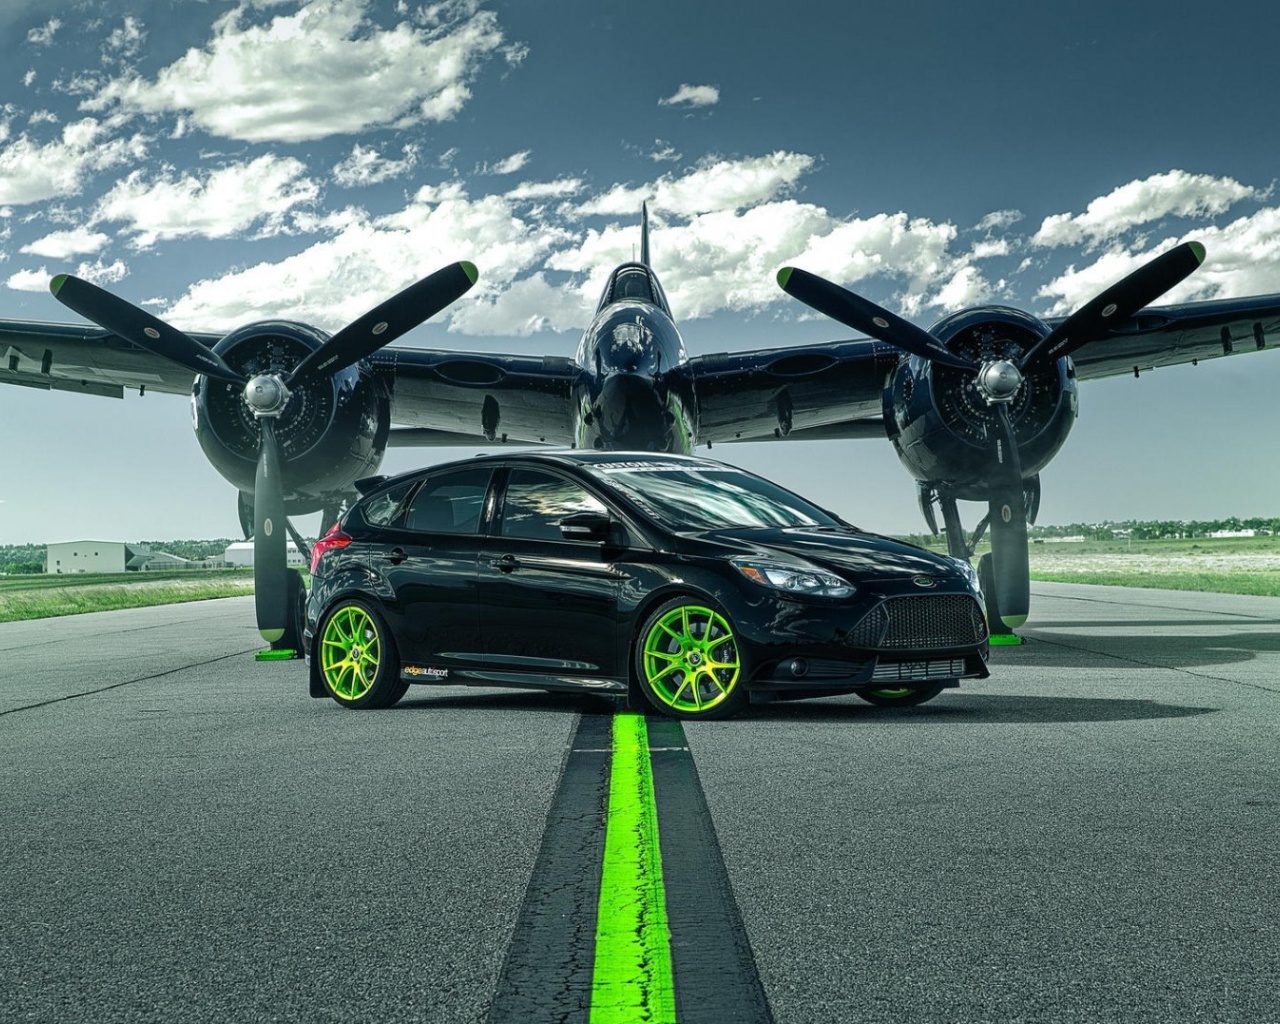 Das Ford Focus ST with Jet Wallpaper 1280x1024